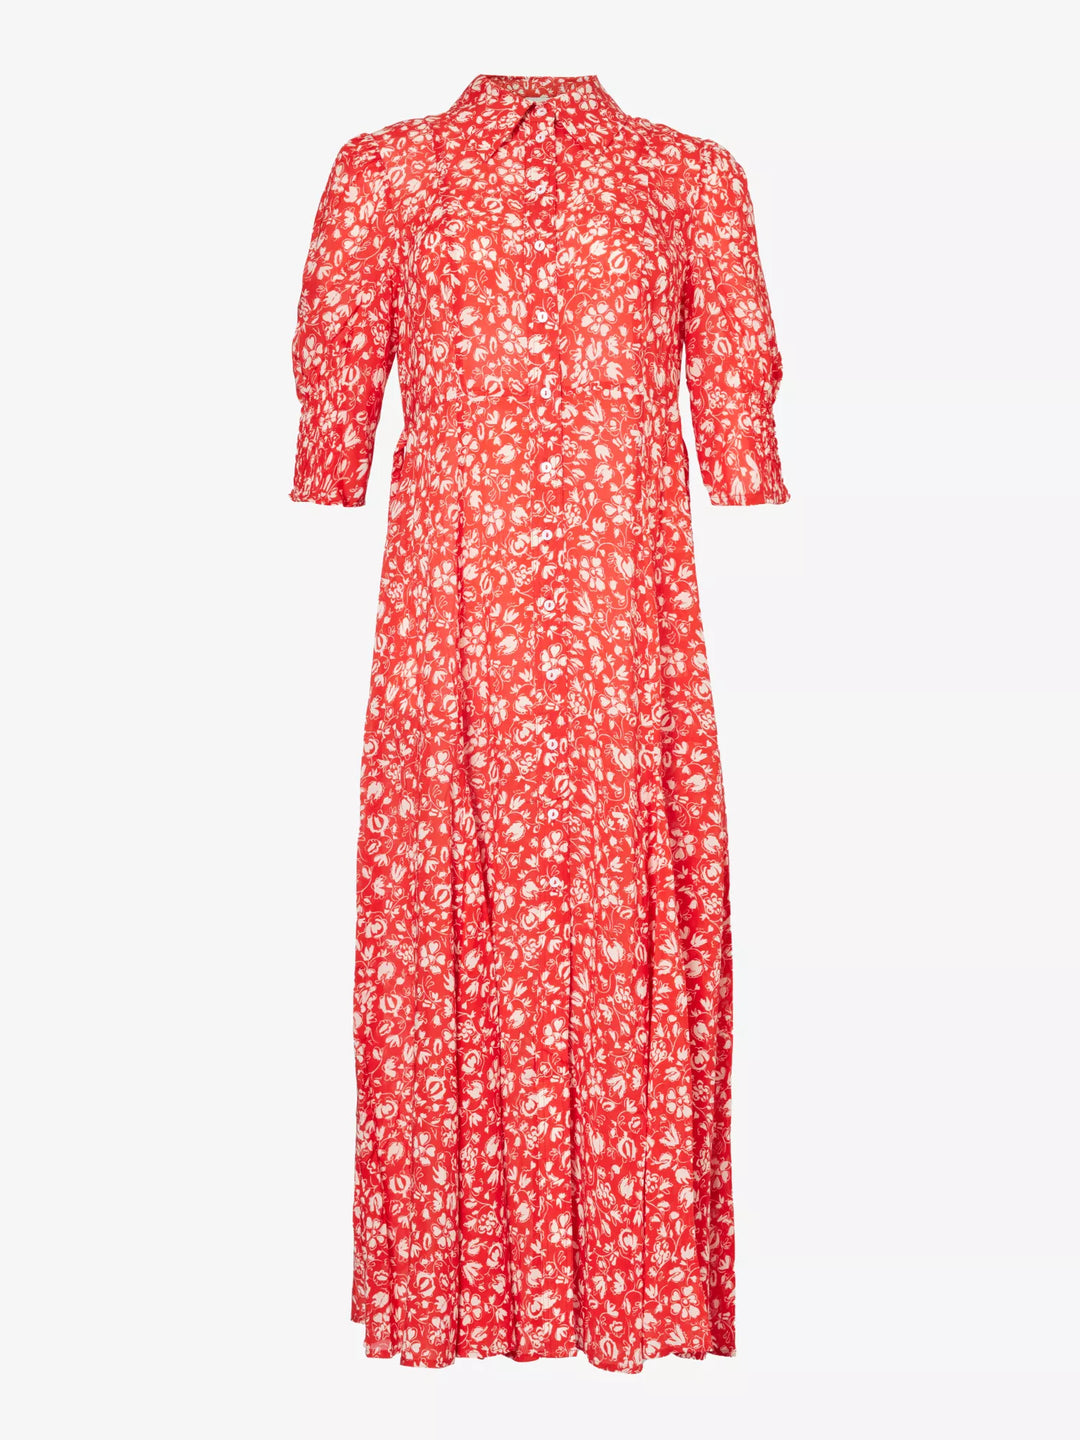 RIXO - Bloom Dress in Amelie Floral Red